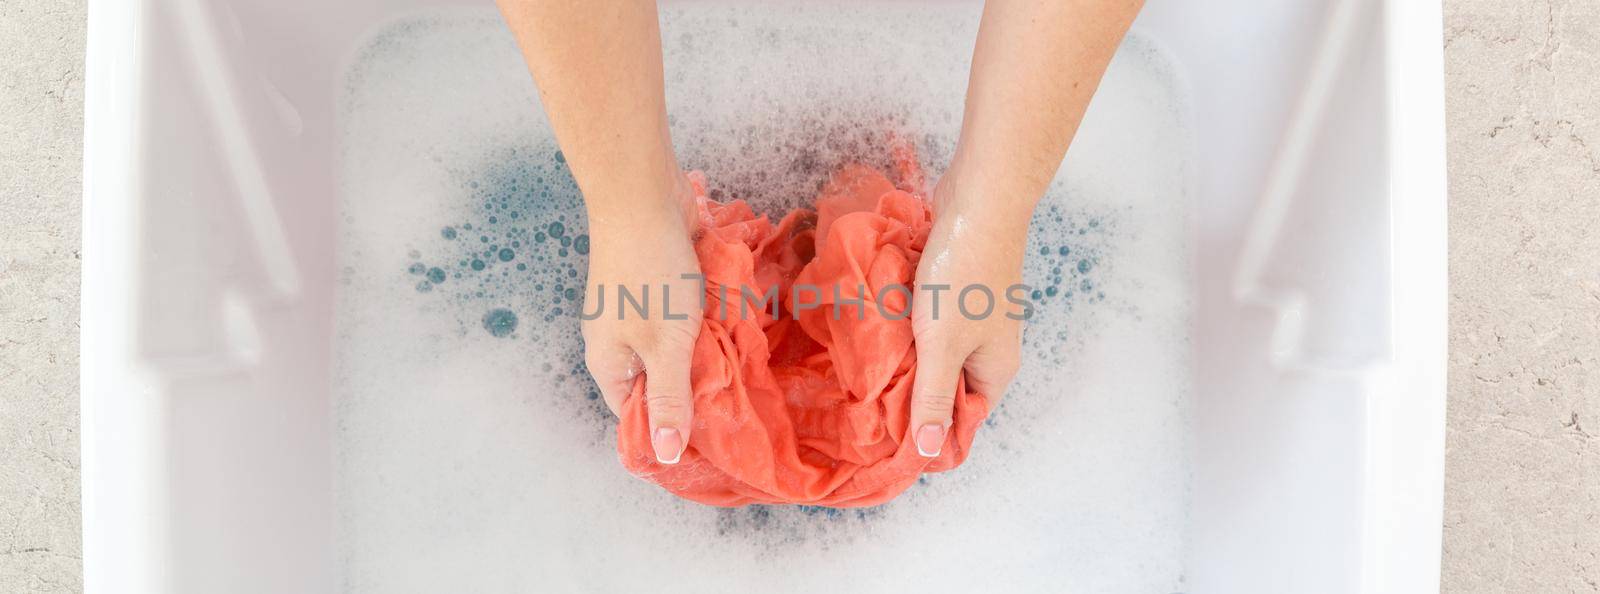 Female hands washing color clothes in sink by Mariakray